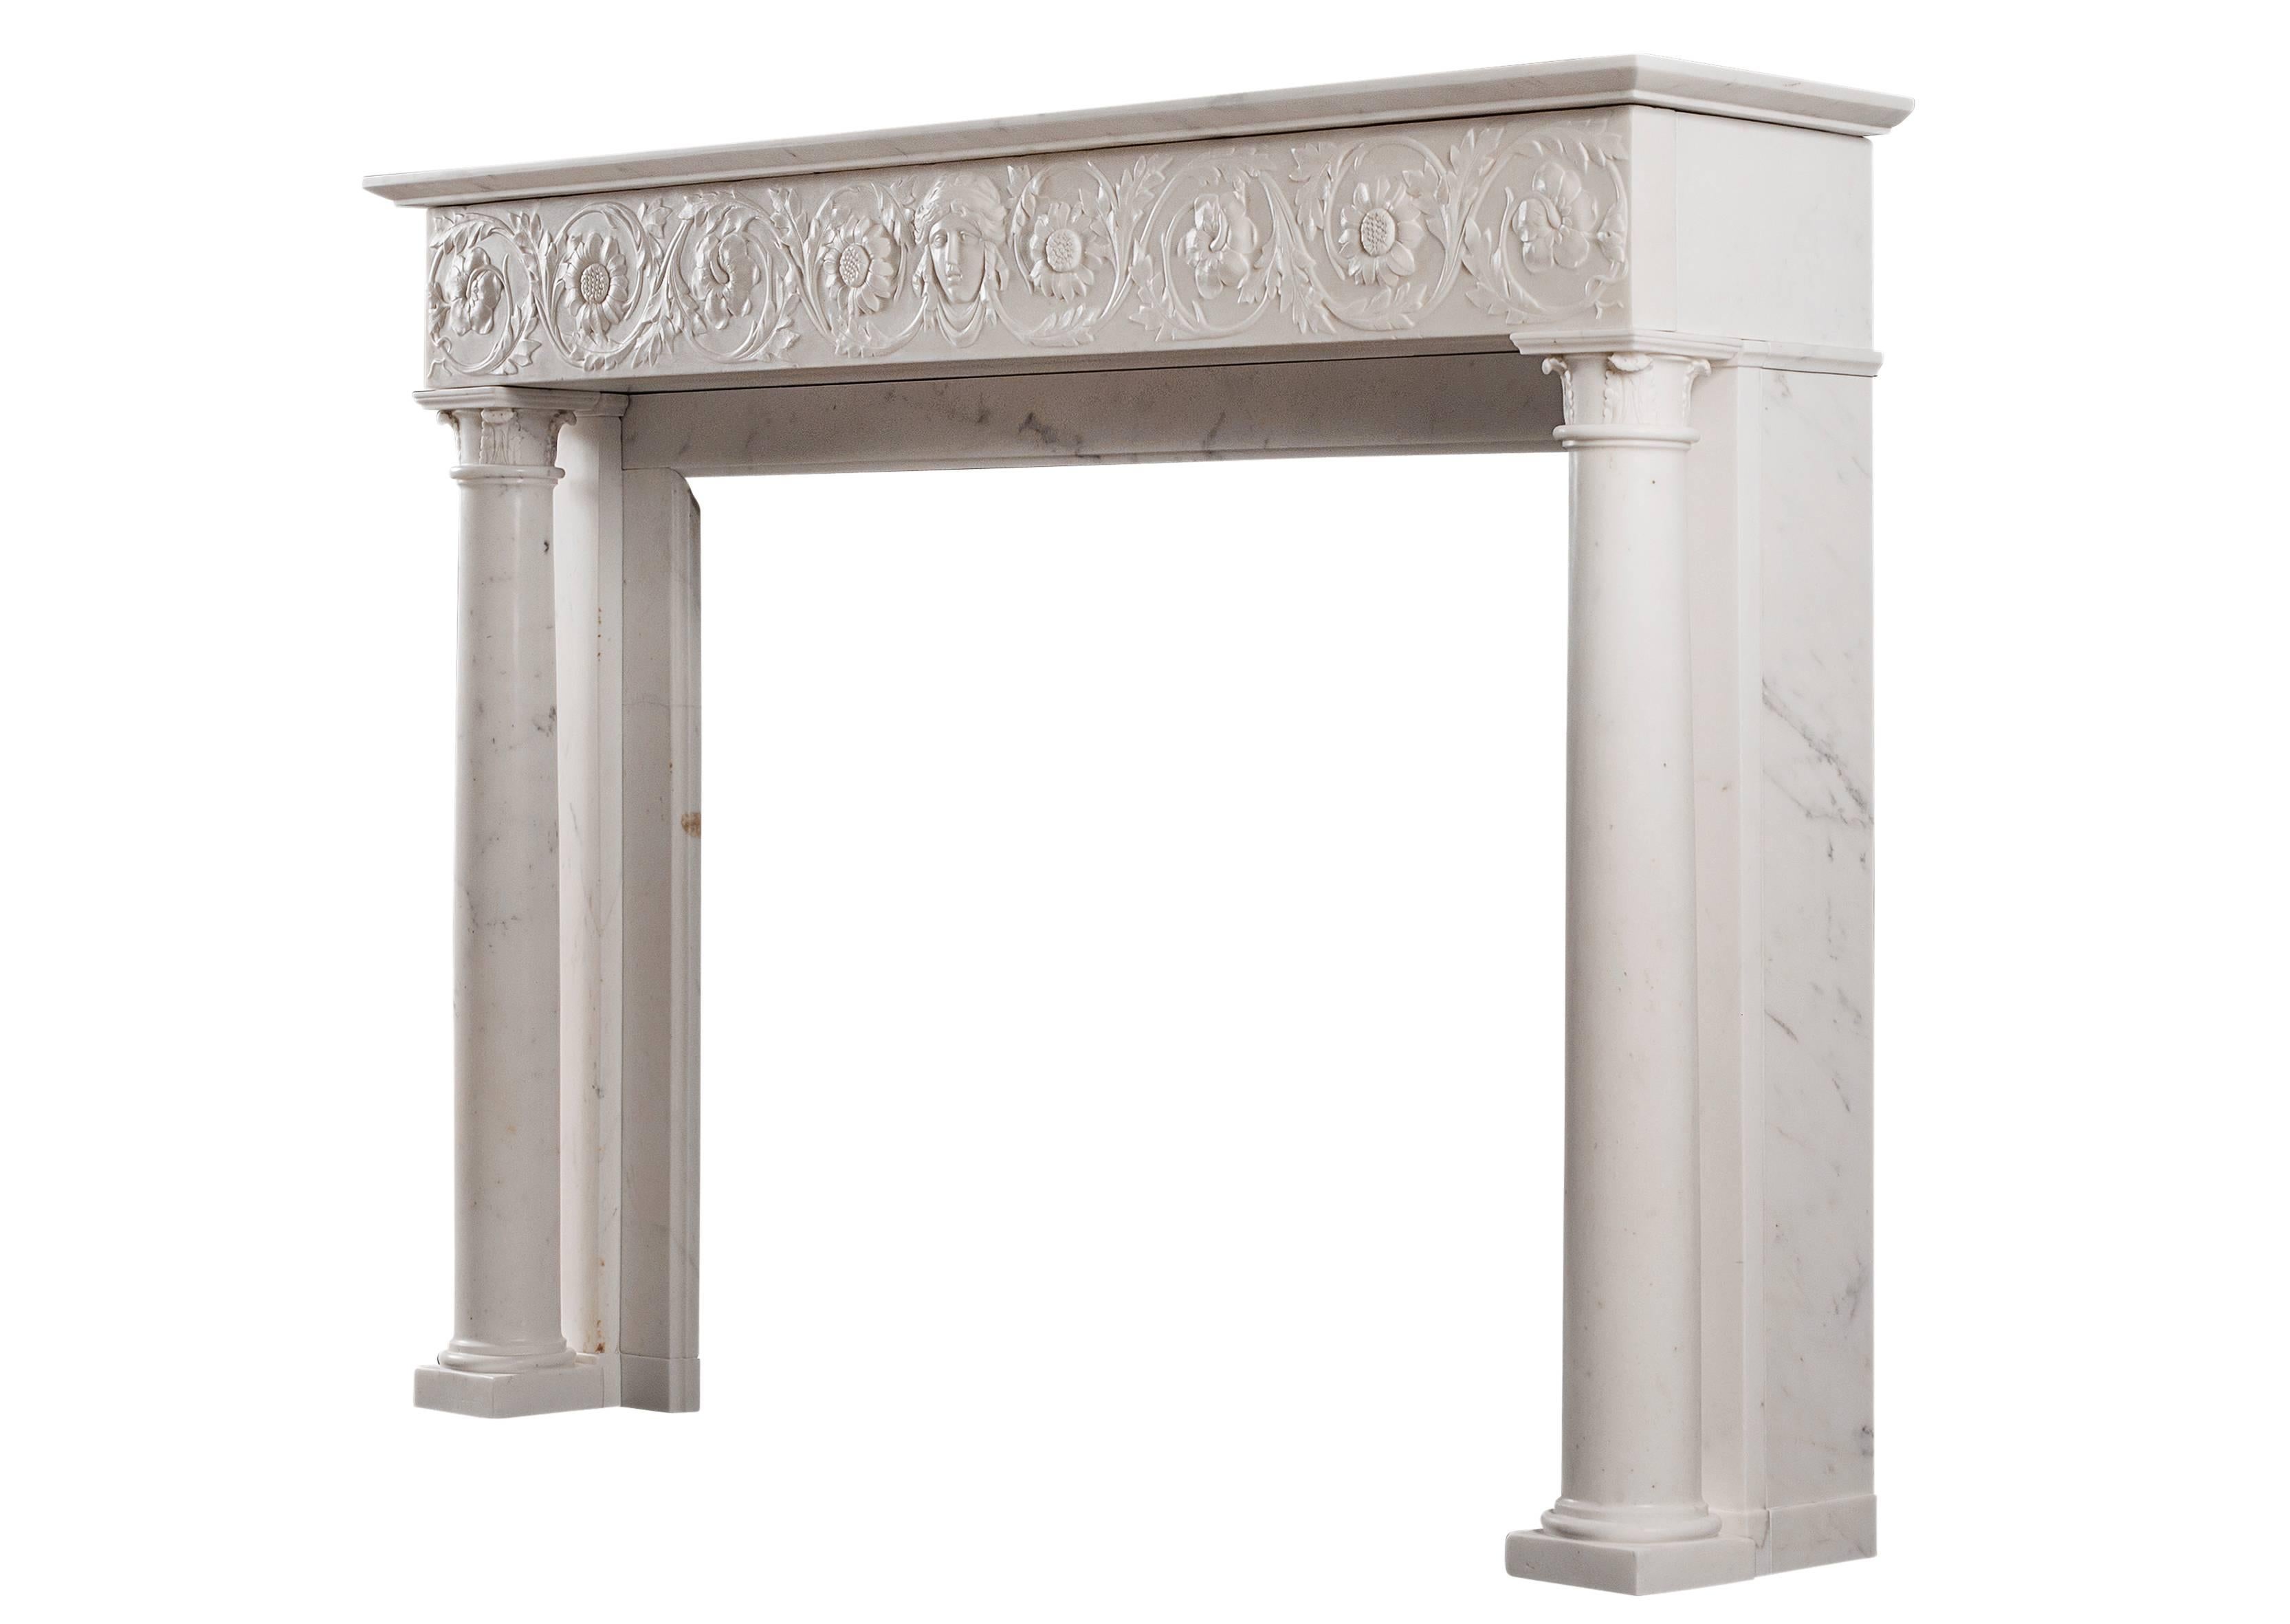 A fine quality antique Italian fireplace carved in Statuary marble. The running frieze delicately carved with sunflowers and foliage with female mask to centre. The full round tapering columns with carved turned over acanthus leaves to capitals,